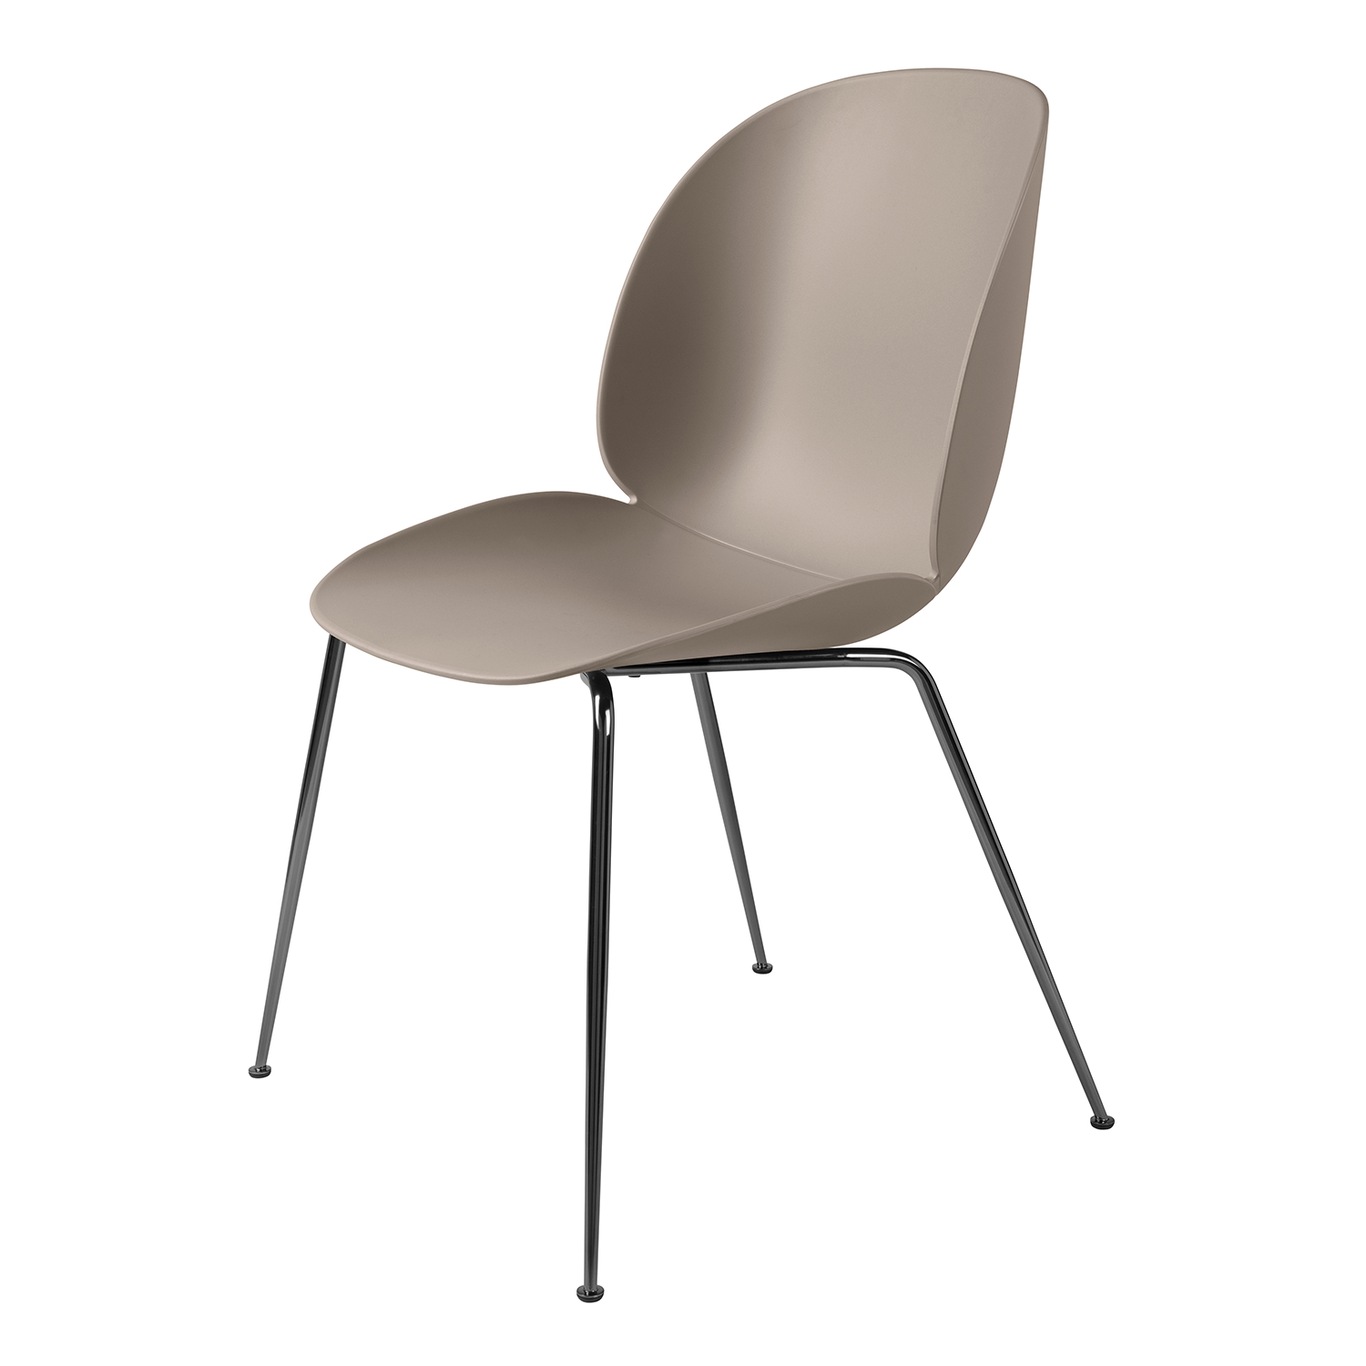 Beetle Dining Chair Unupholstered, Conic Base Black Chromed, New Beige